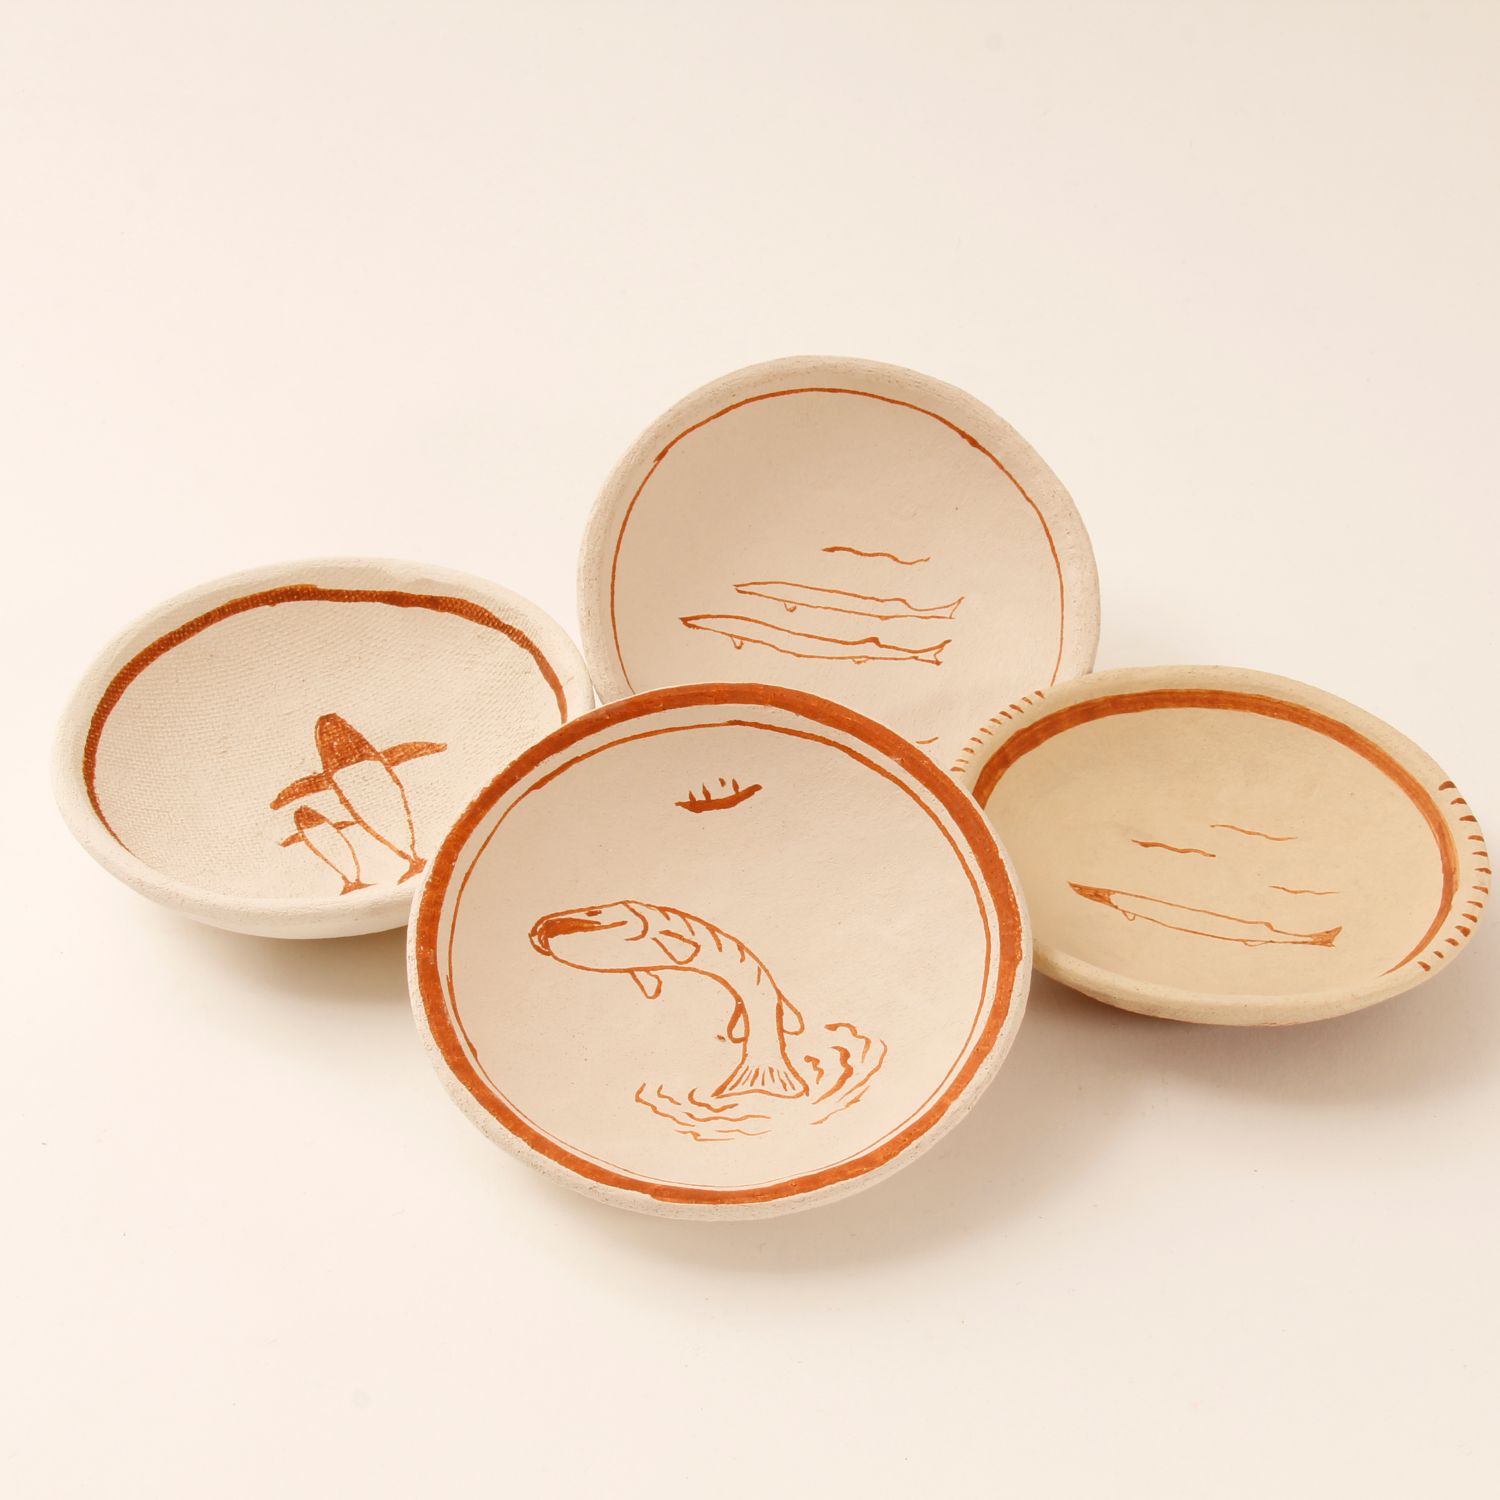 David Migwans: Assorted Whale Bowl (Each sold separately) Product Image 1 of 2